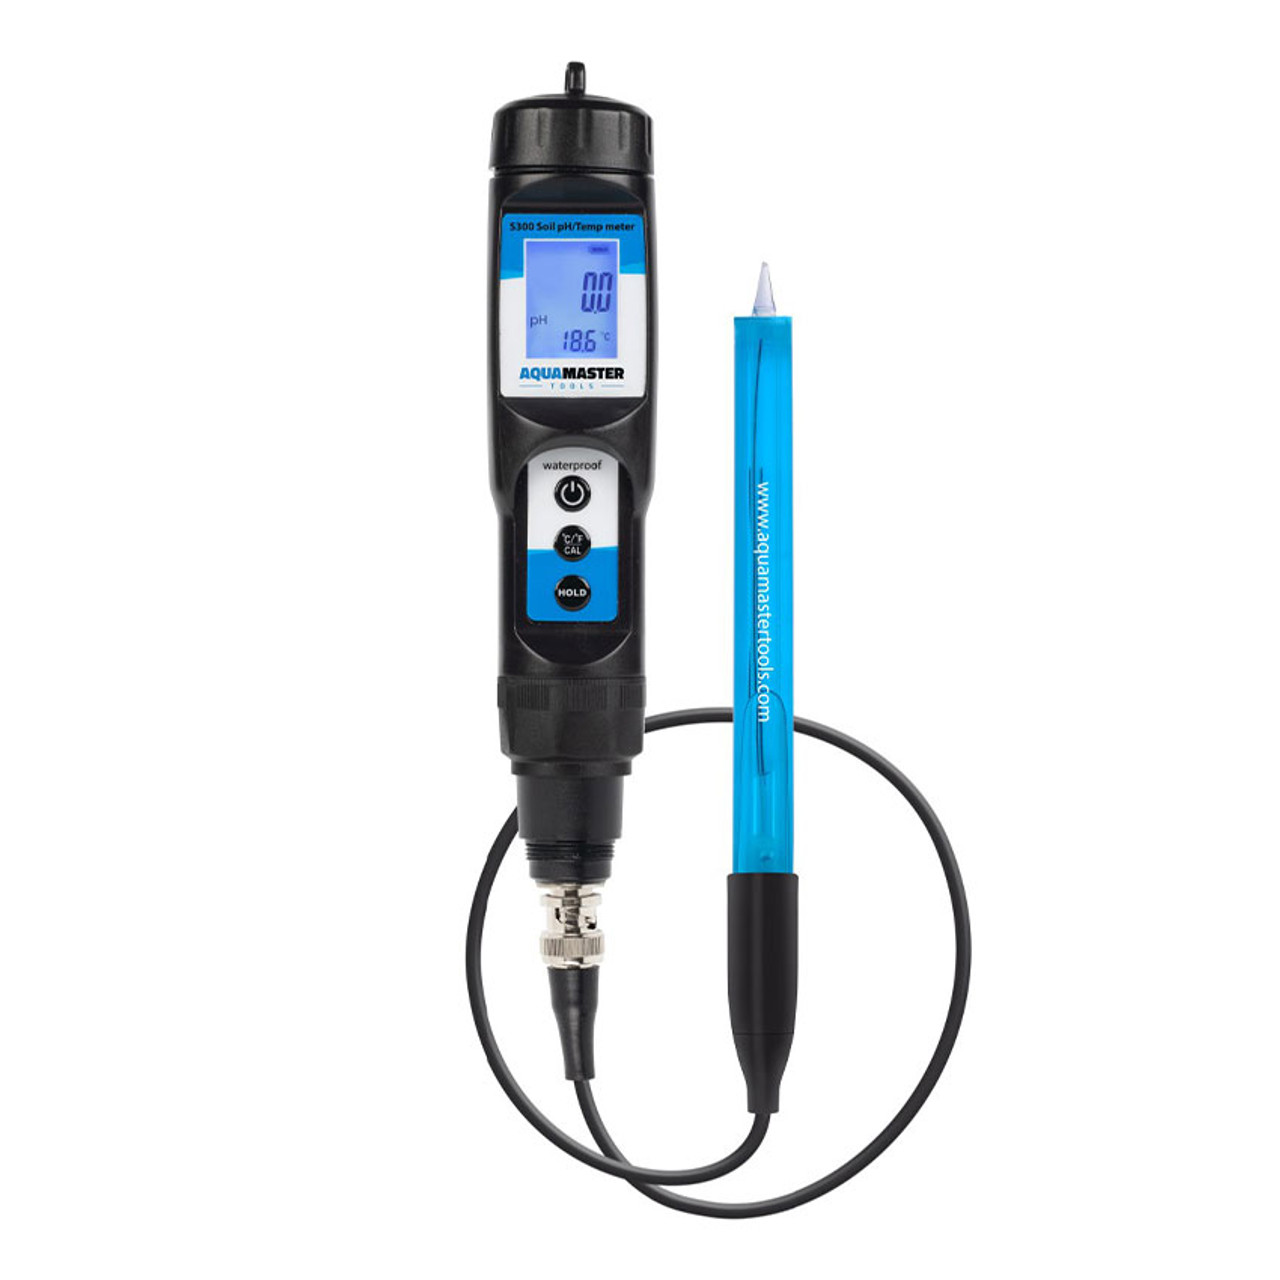 AQUAMASTER S300 PRO-2 SUBSTRATE PH - TEMP METER